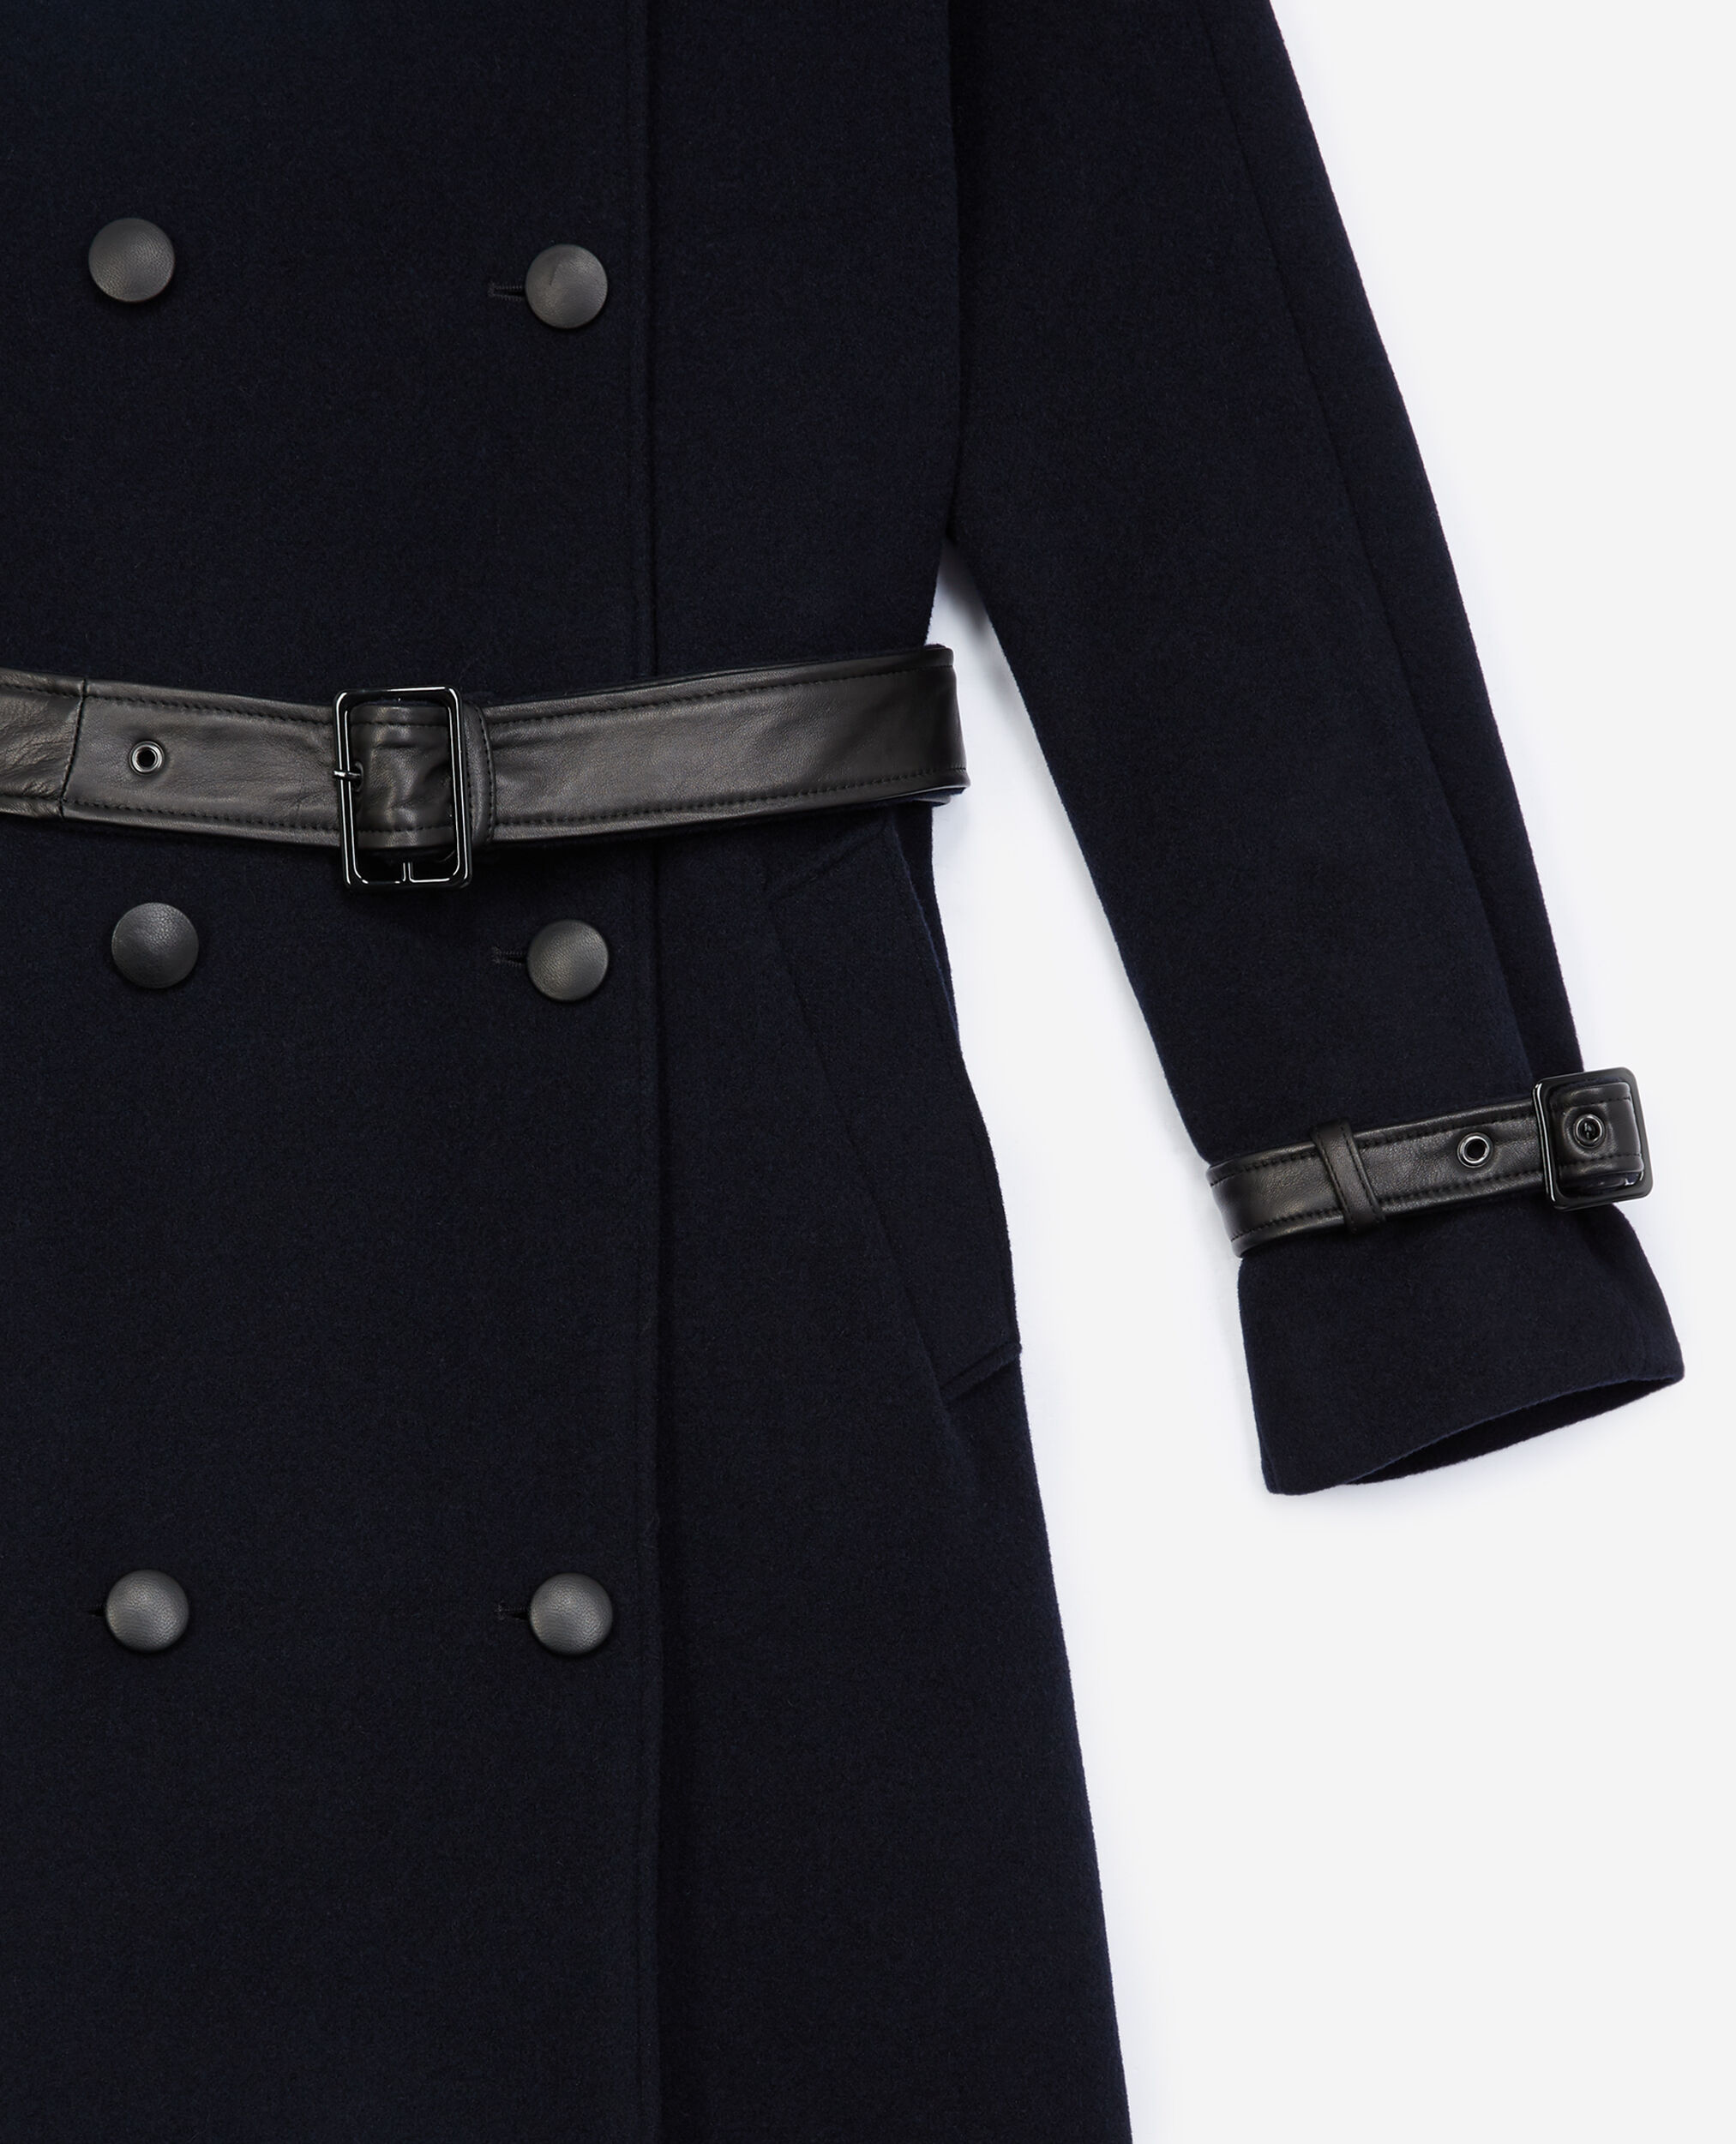 Trench-style navy blue wool coat, DARK NAVY, hi-res image number null